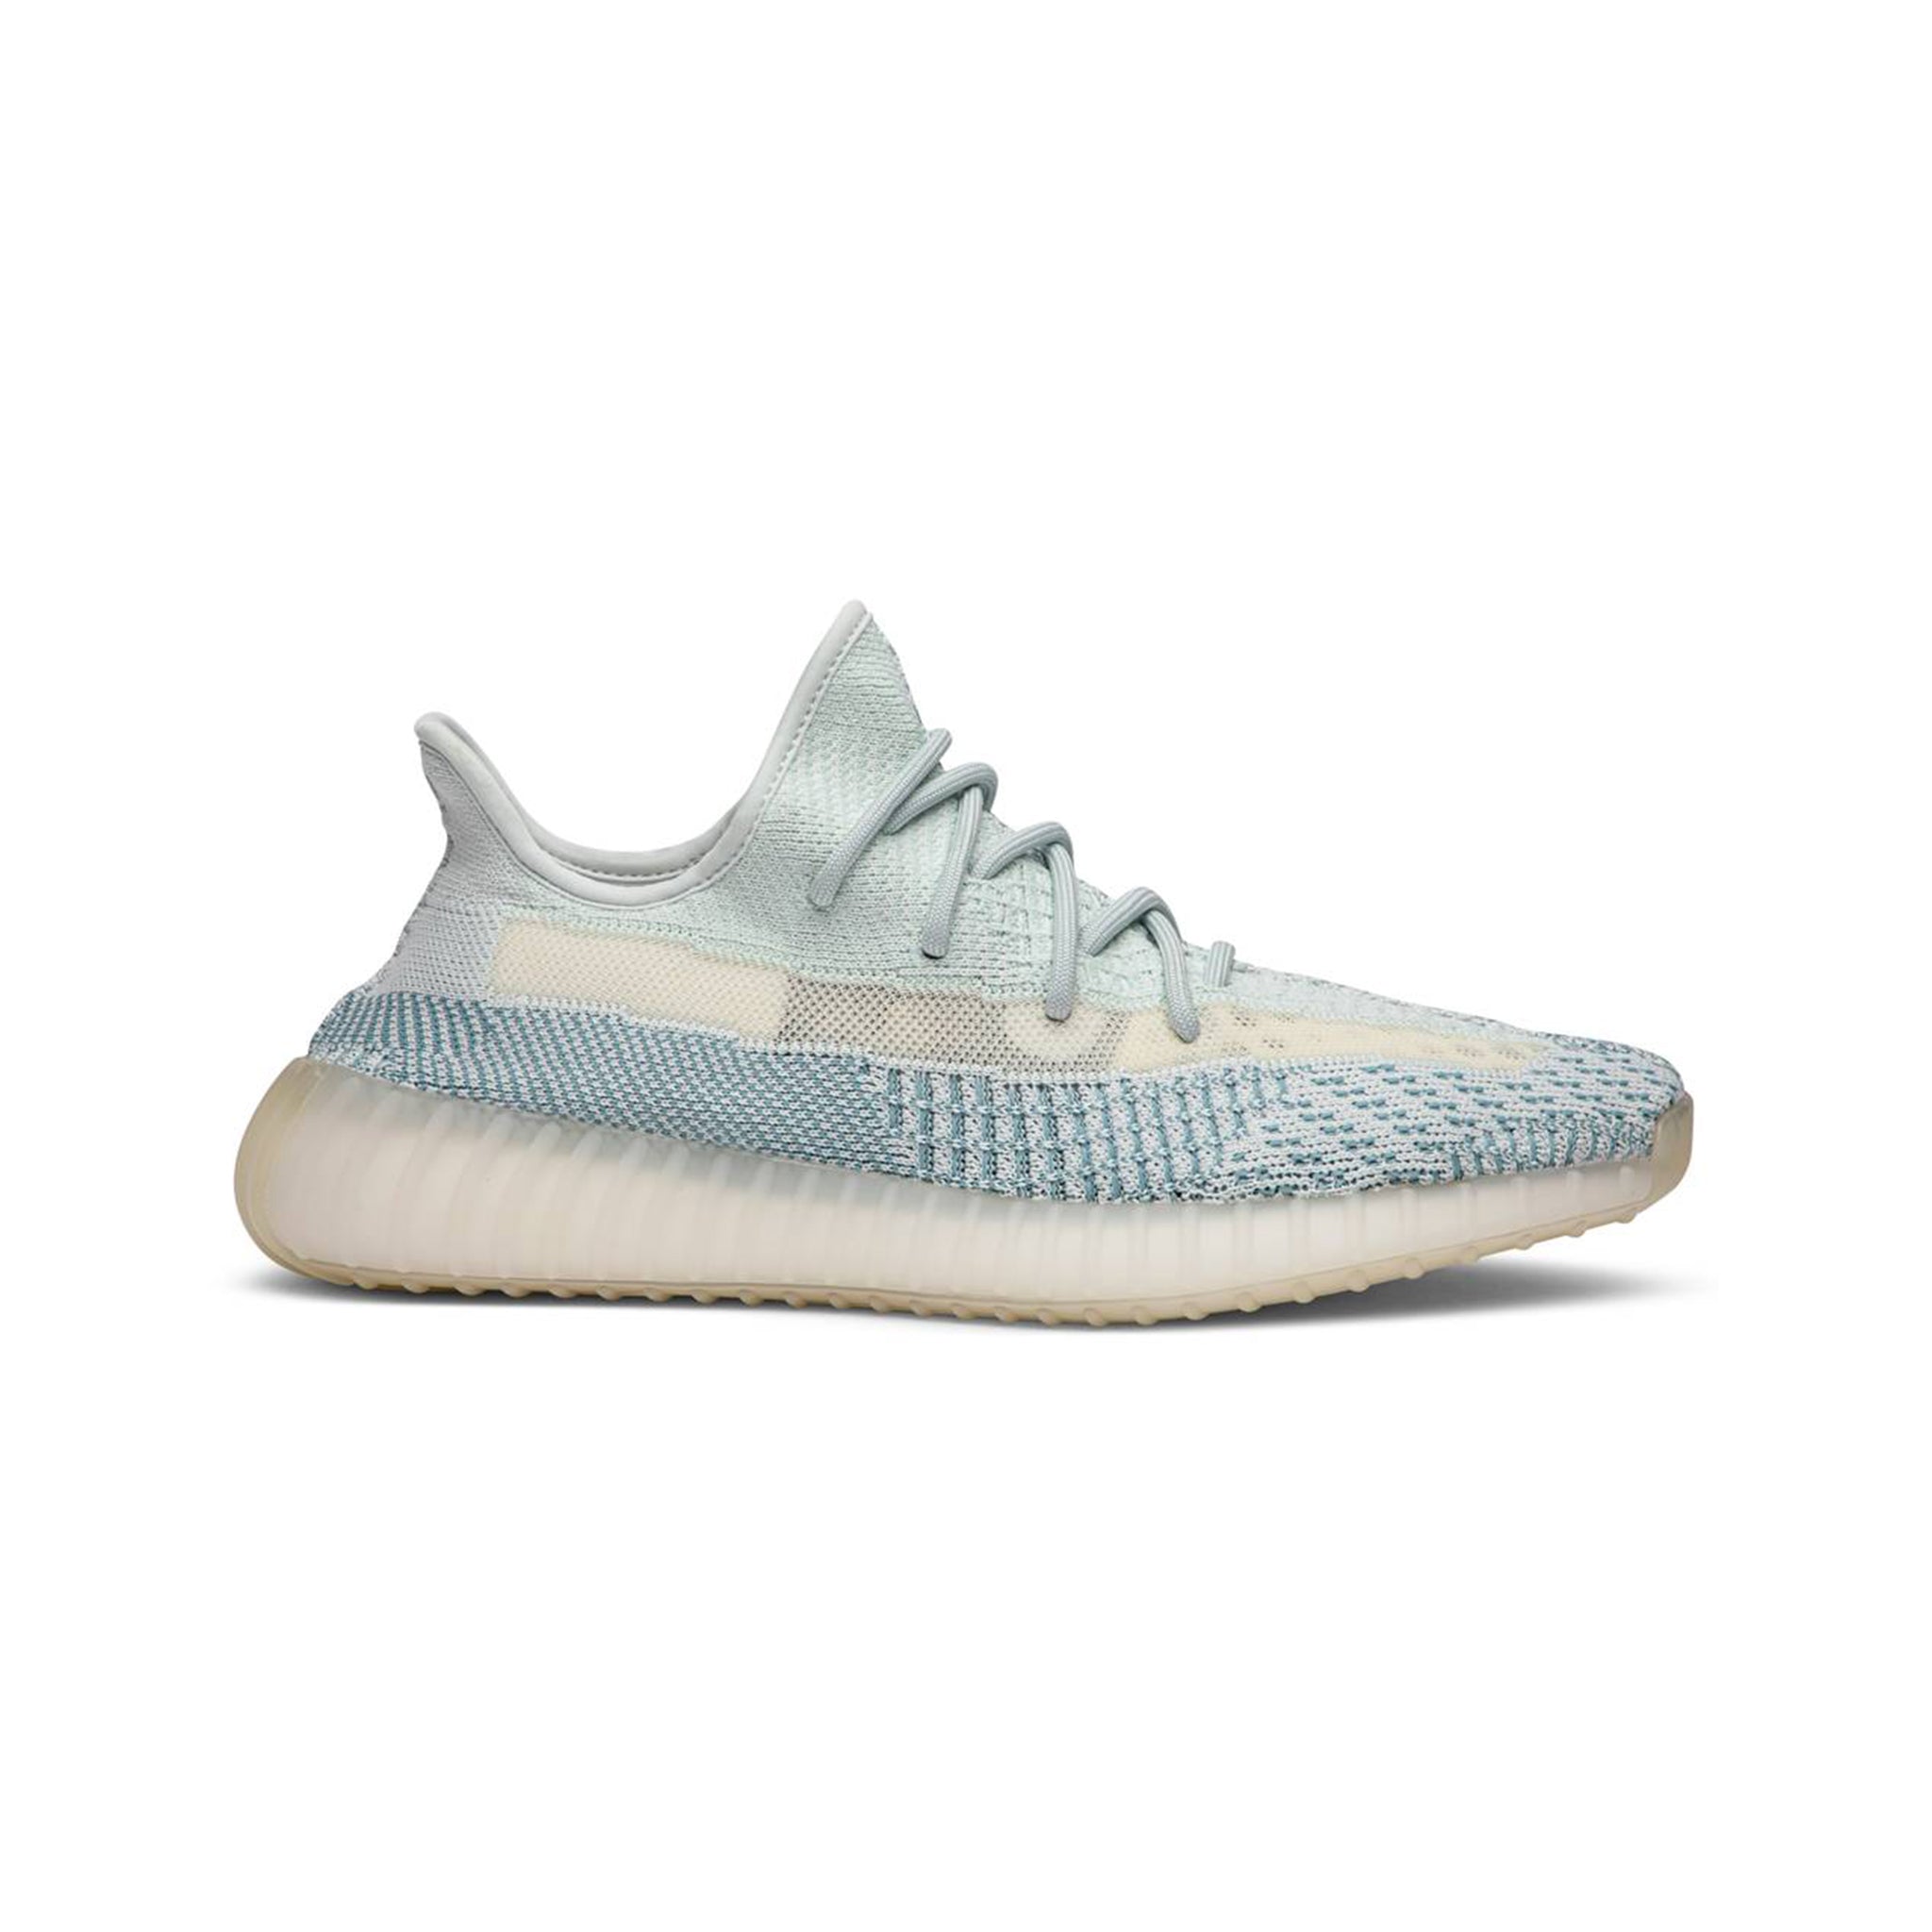 ADIDAS YEEZY BOOST 350 V2 CLOUD WHITE (NON-REFLECTIVE)